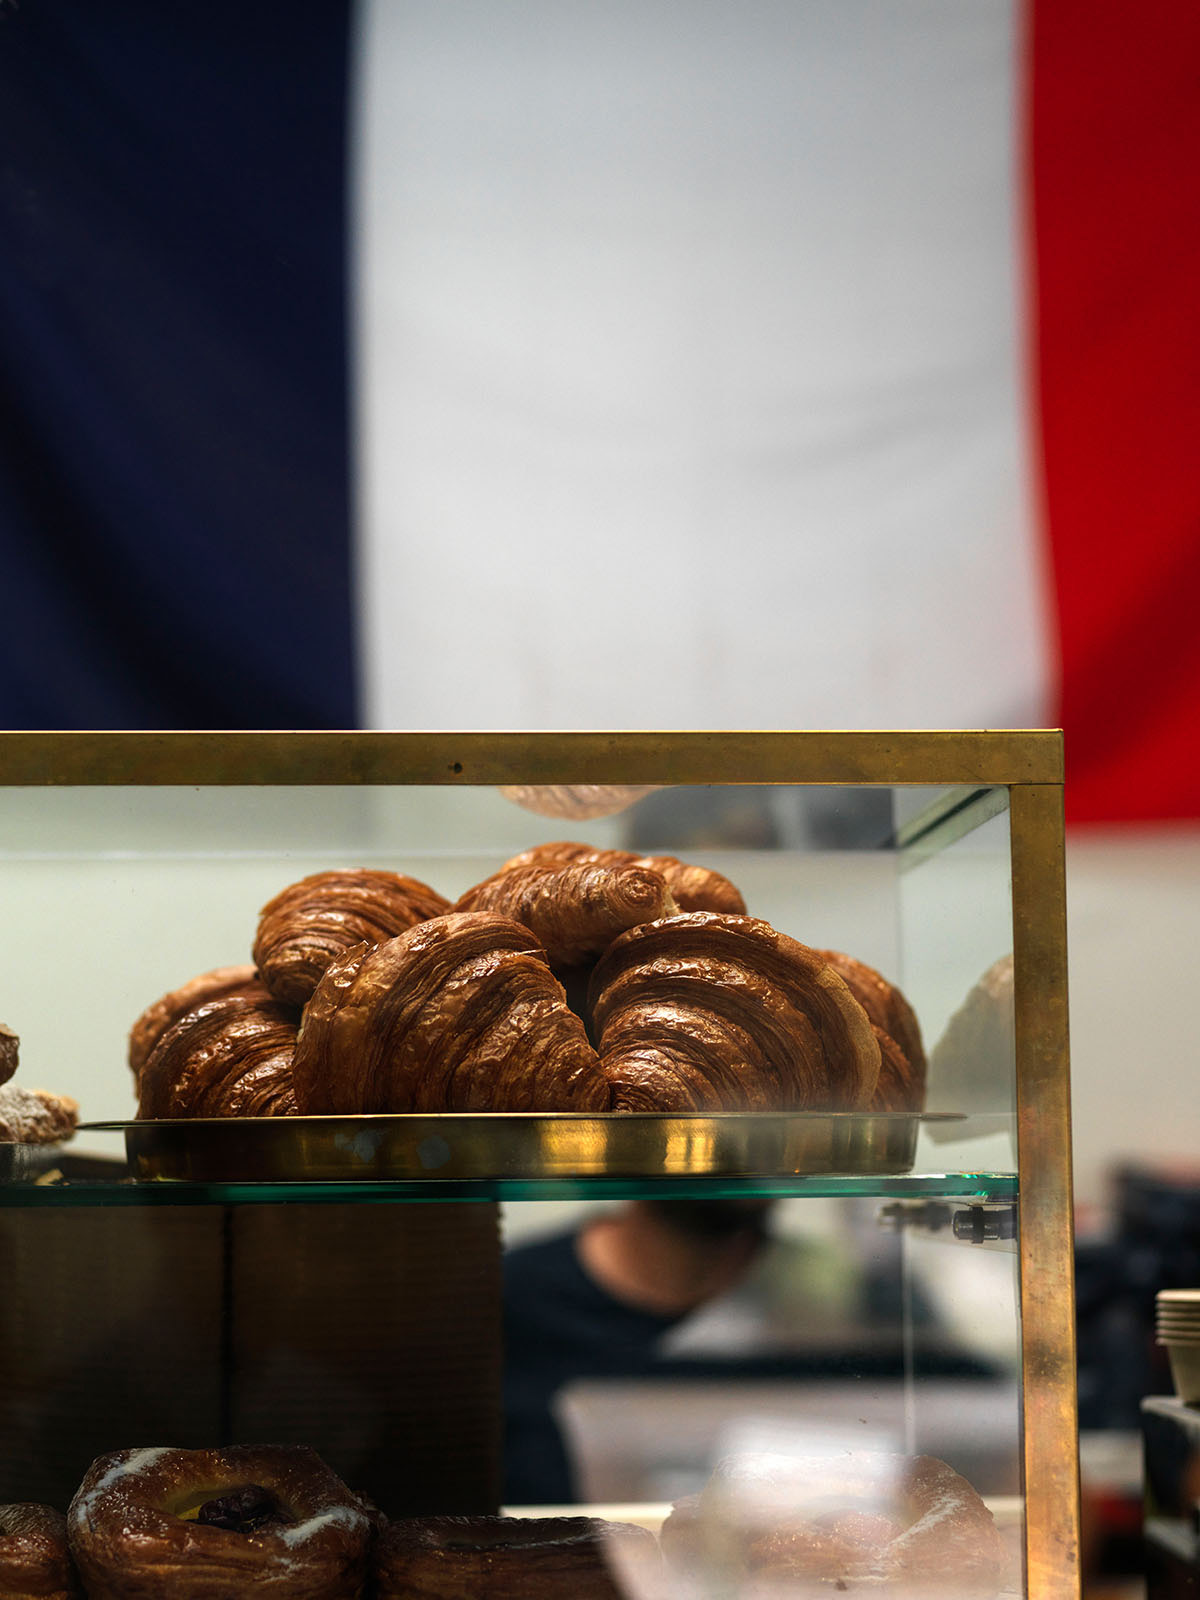 Come for the coffee, stay for the pastries